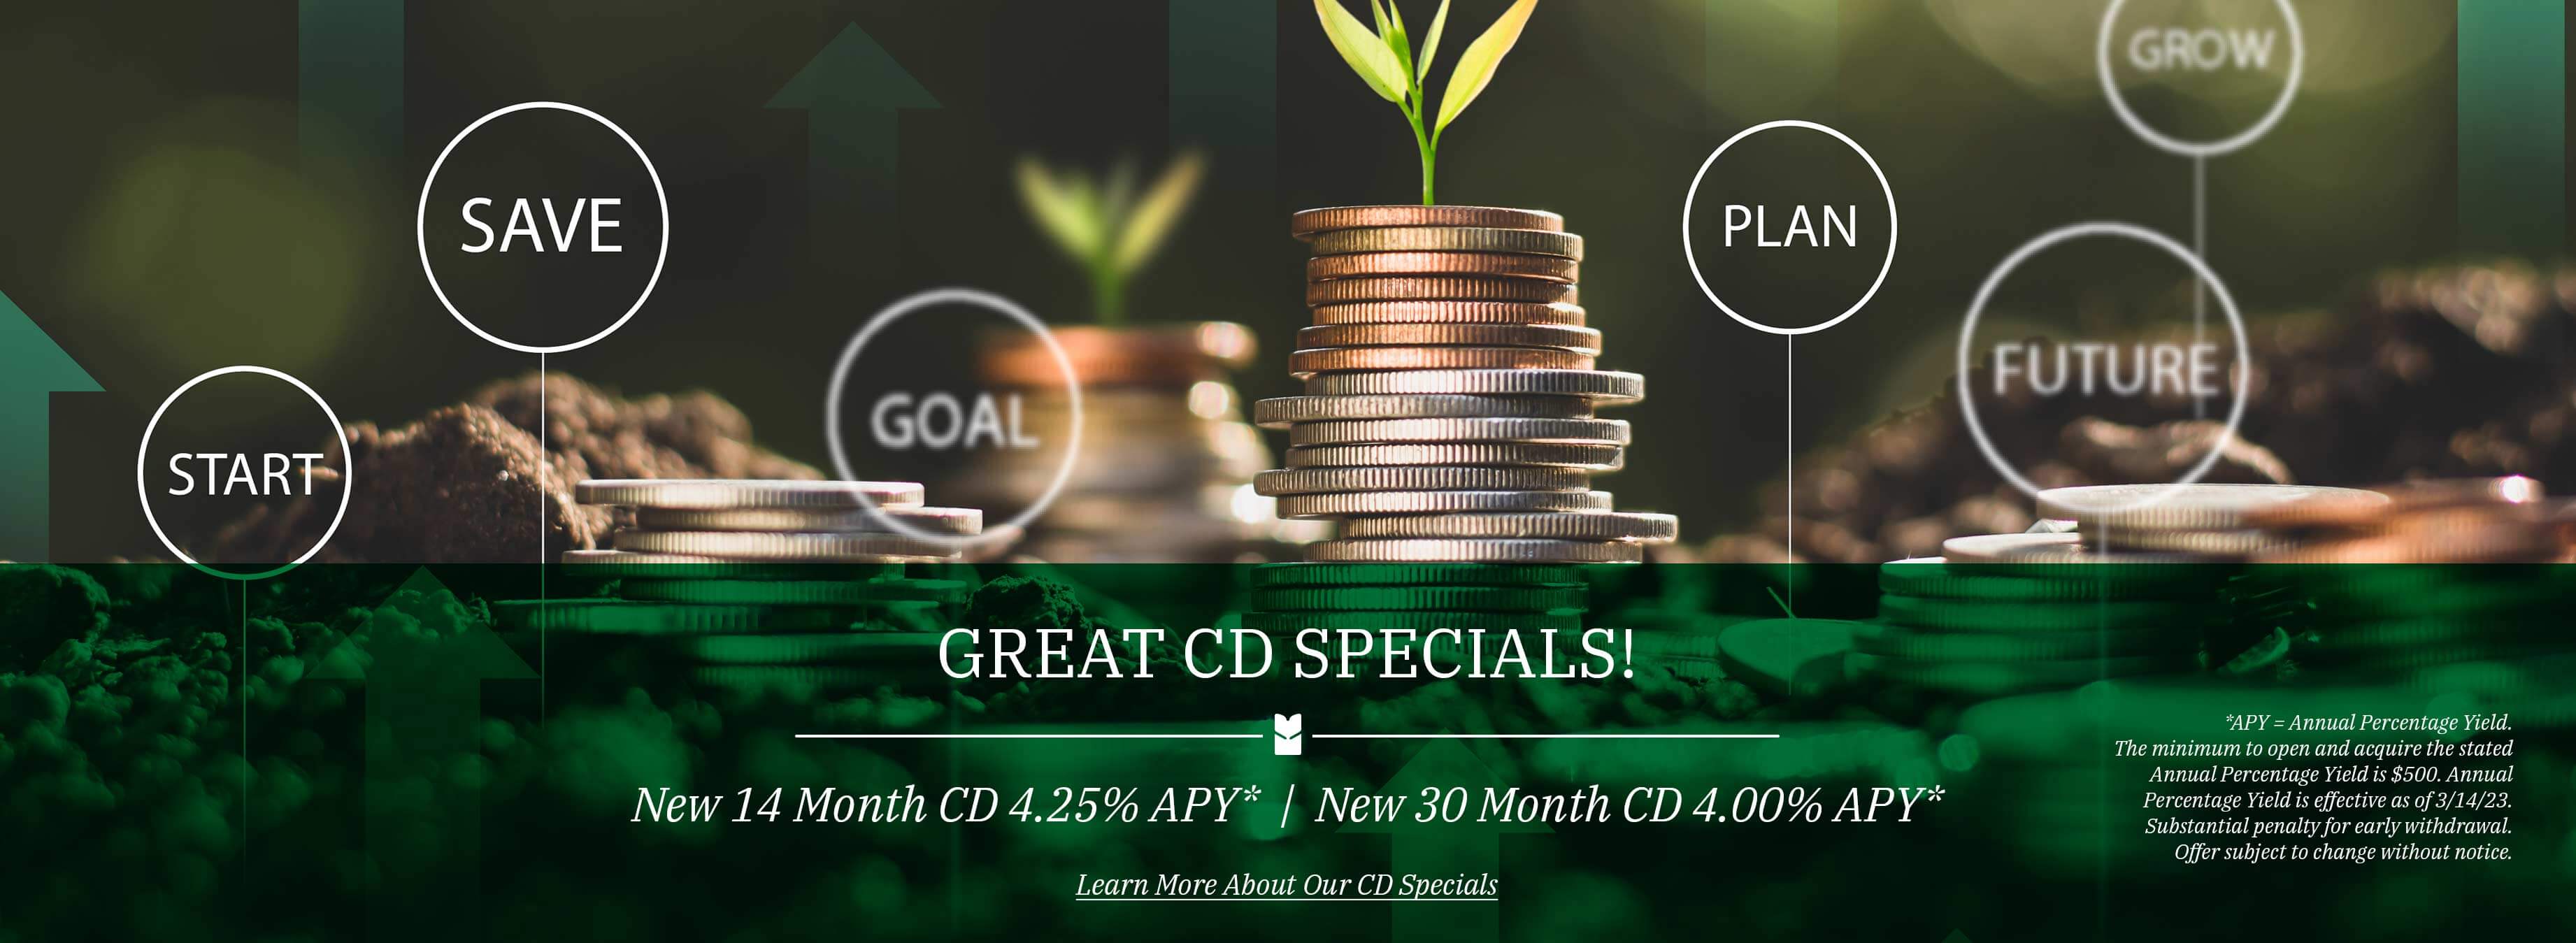 Great CD Specials! New 14 Month CD 4.25% APY. New 30 Month CD 4.00% APY. Learn more about our CD specials. *APY = Annual Percentage Yield. The minimum to open and acquire the stated Annual Percentage Yield is $500. Annual Percentage Yield is effective as of 3/14/23. Substantial penalty for early withdrawal. Offer subject to change without notice.